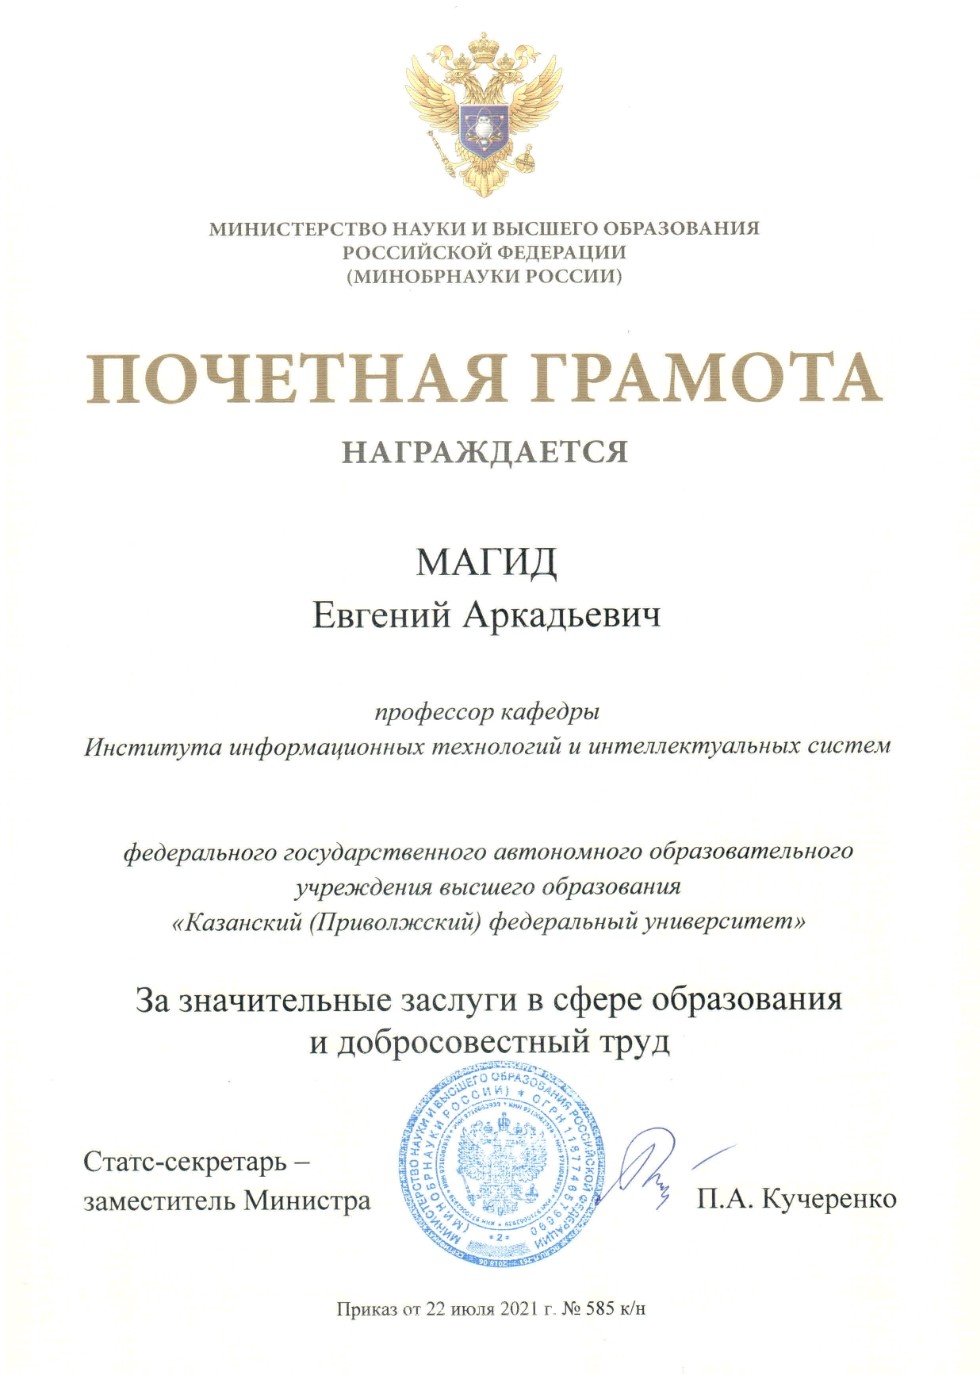 Evgeni Magid was awarded a certificate of honor by the Ministry of Science and Higher Education of the Russian Federation ,LIRS, ITIS, Academic Council